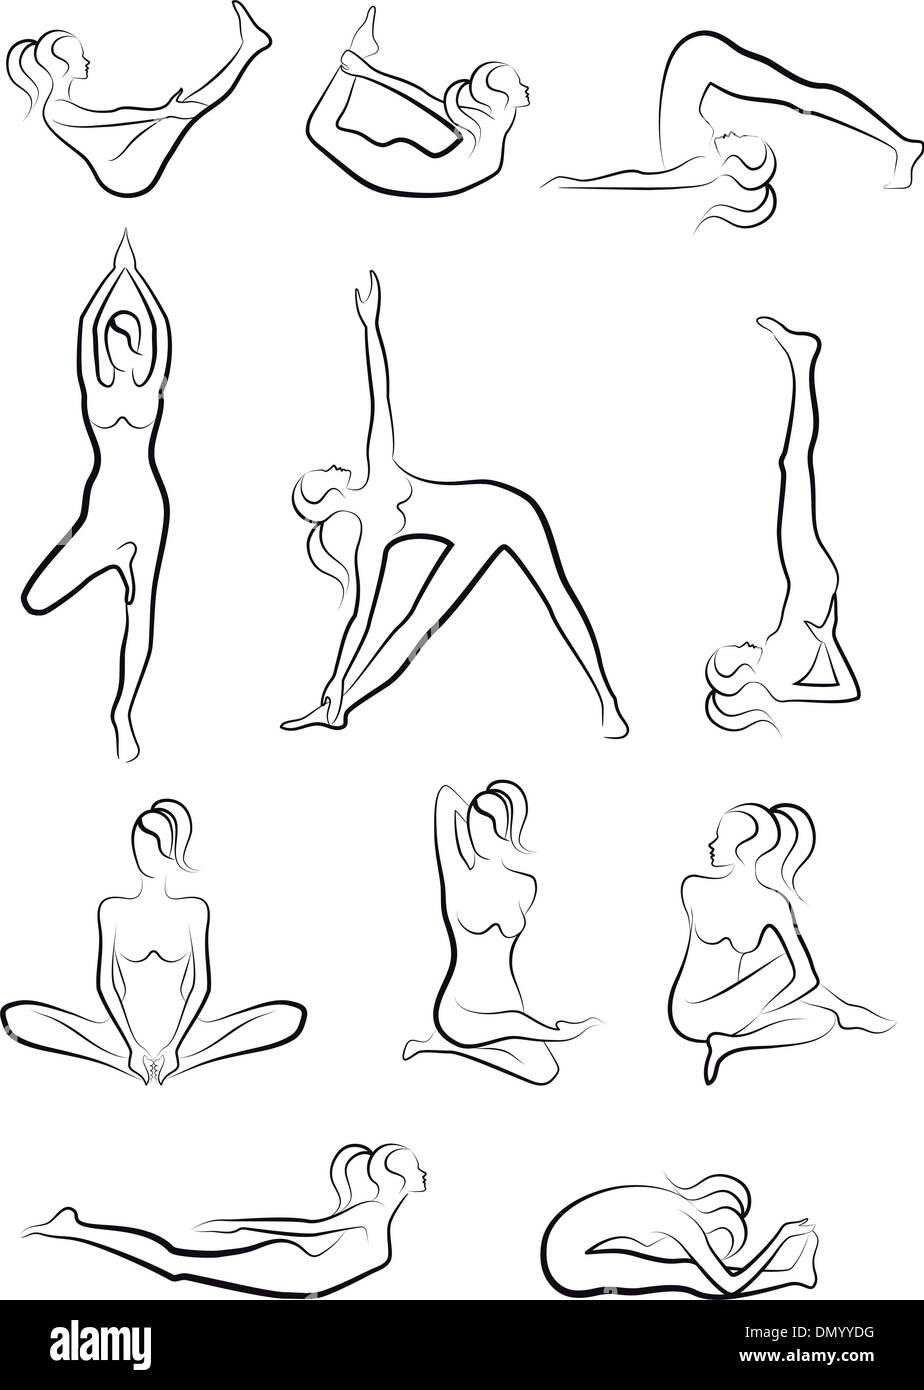 Draw yoga poses, exercise, workout, medical illustrations by Dazzlingmedia  | Fiverr